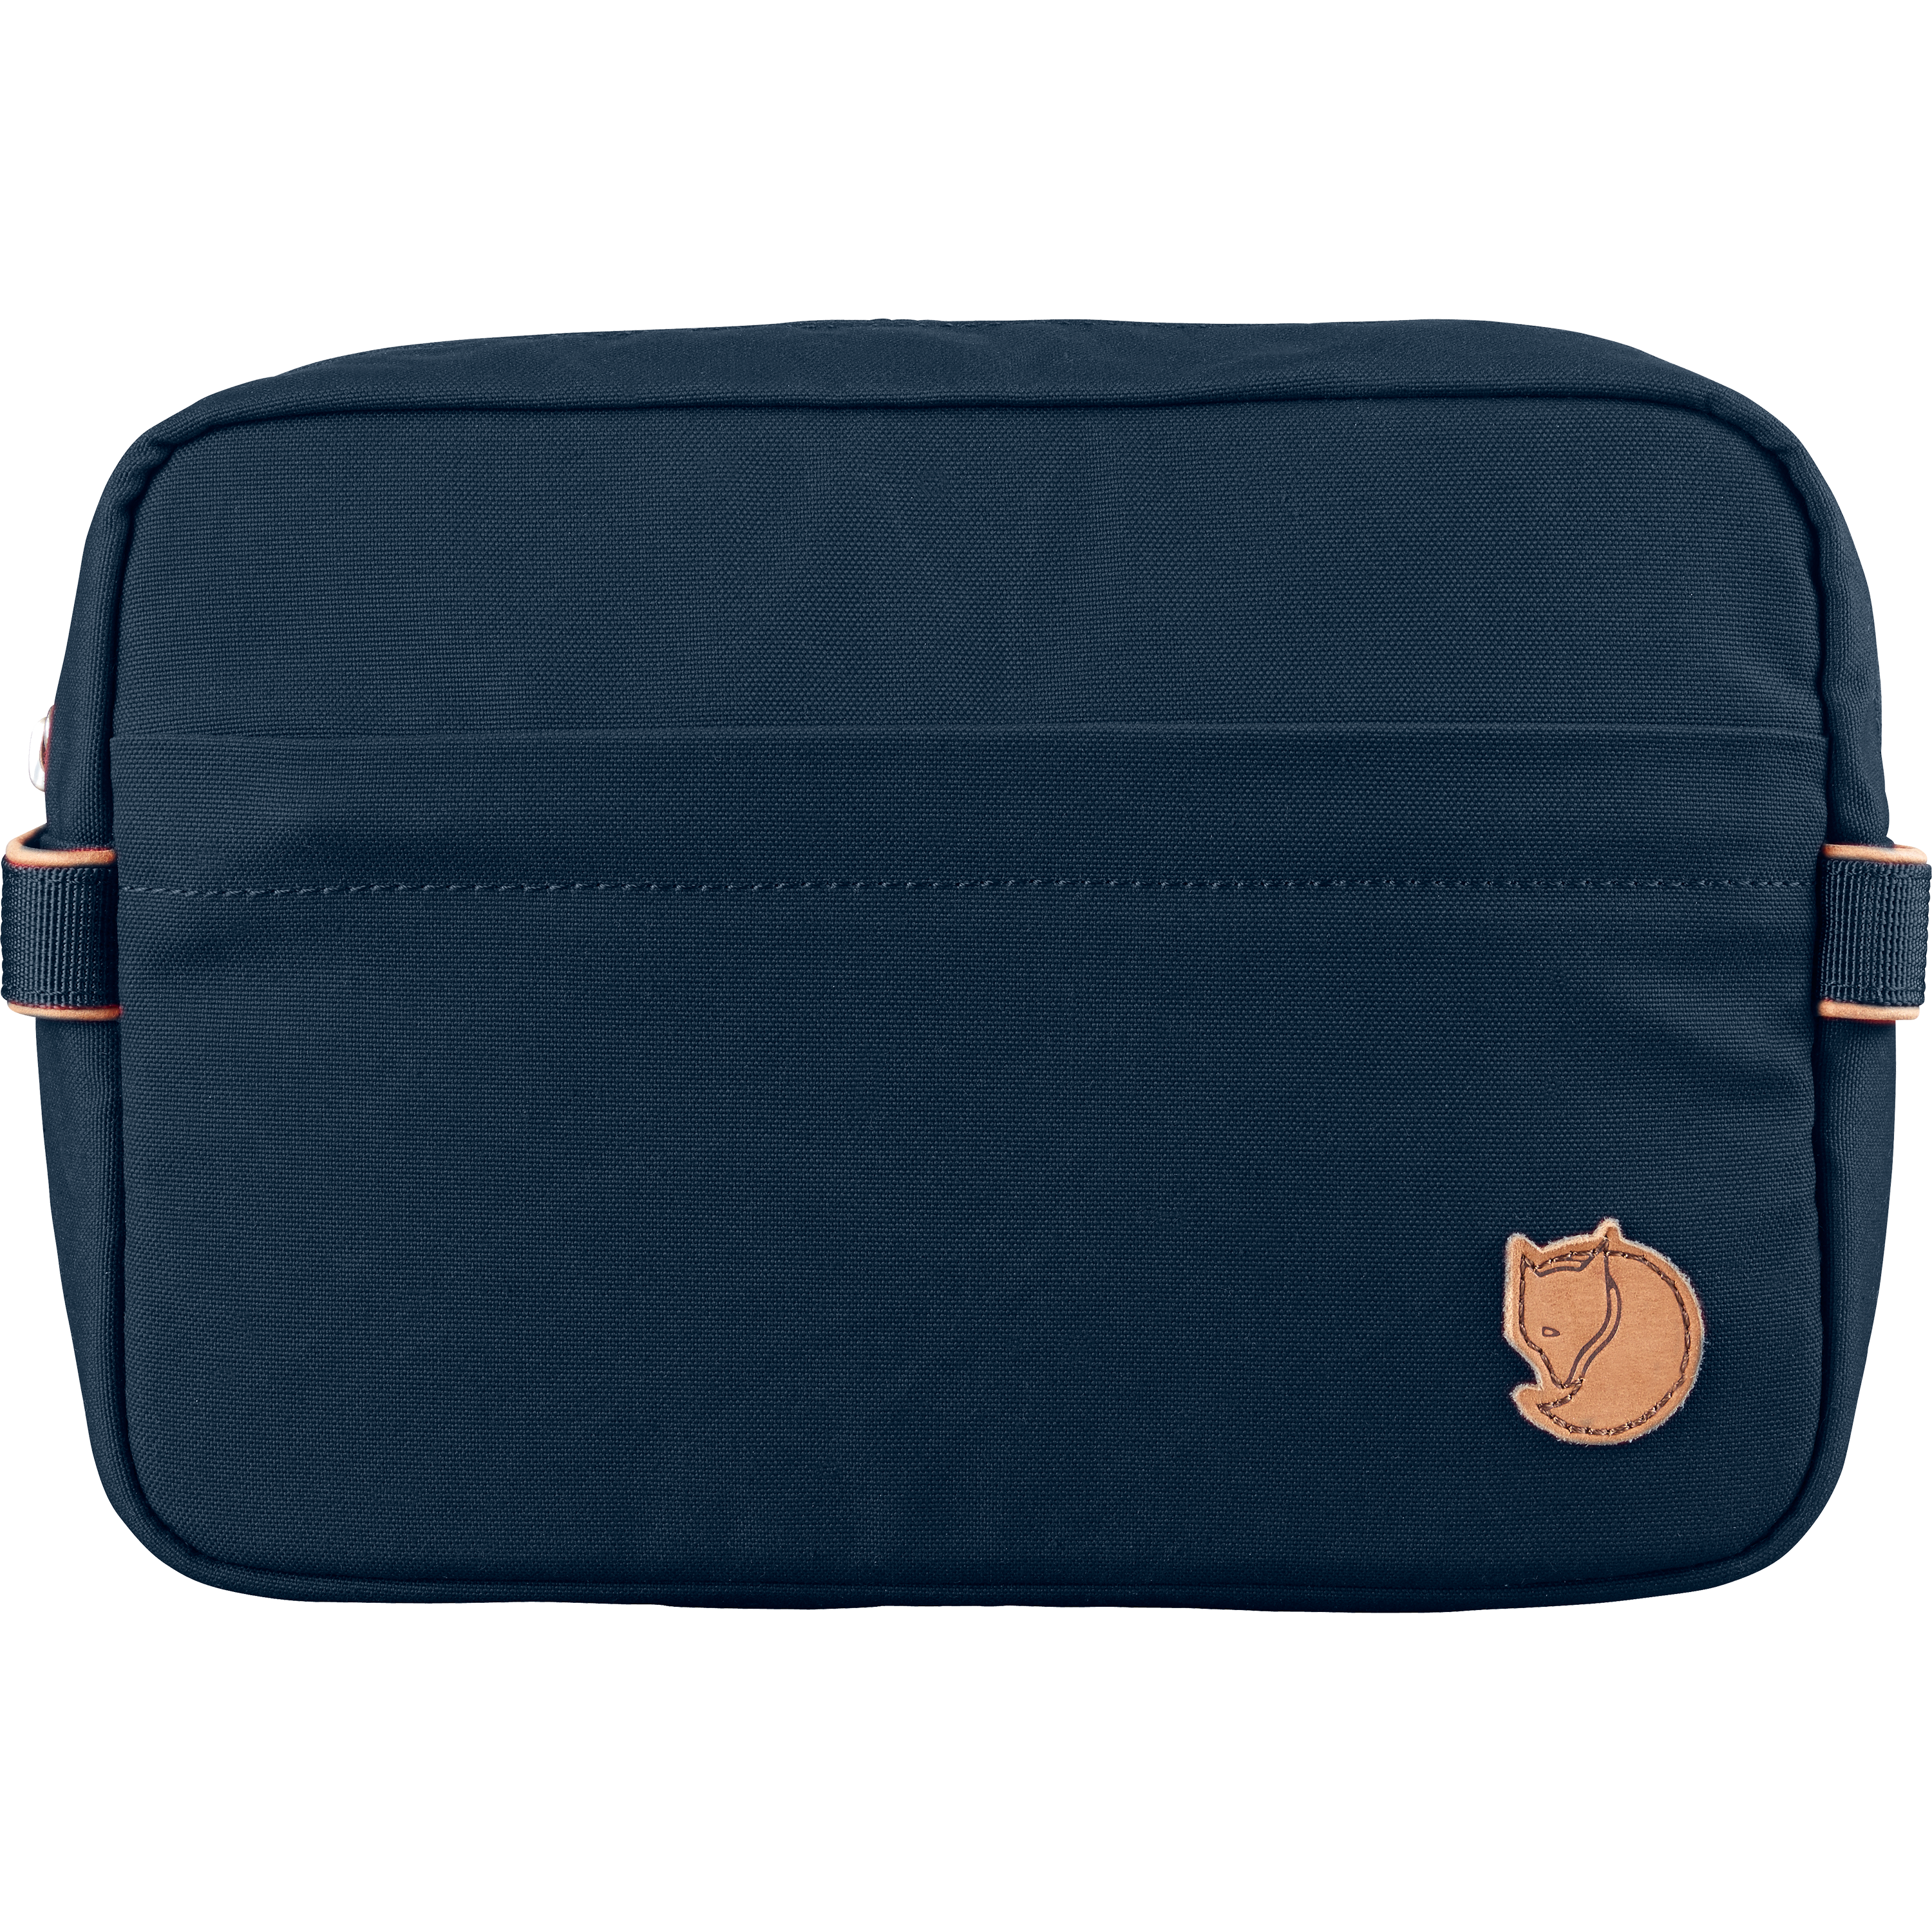 Buy Leather Wash Bag | Toiletry Bag for Travelling Online - Folk India